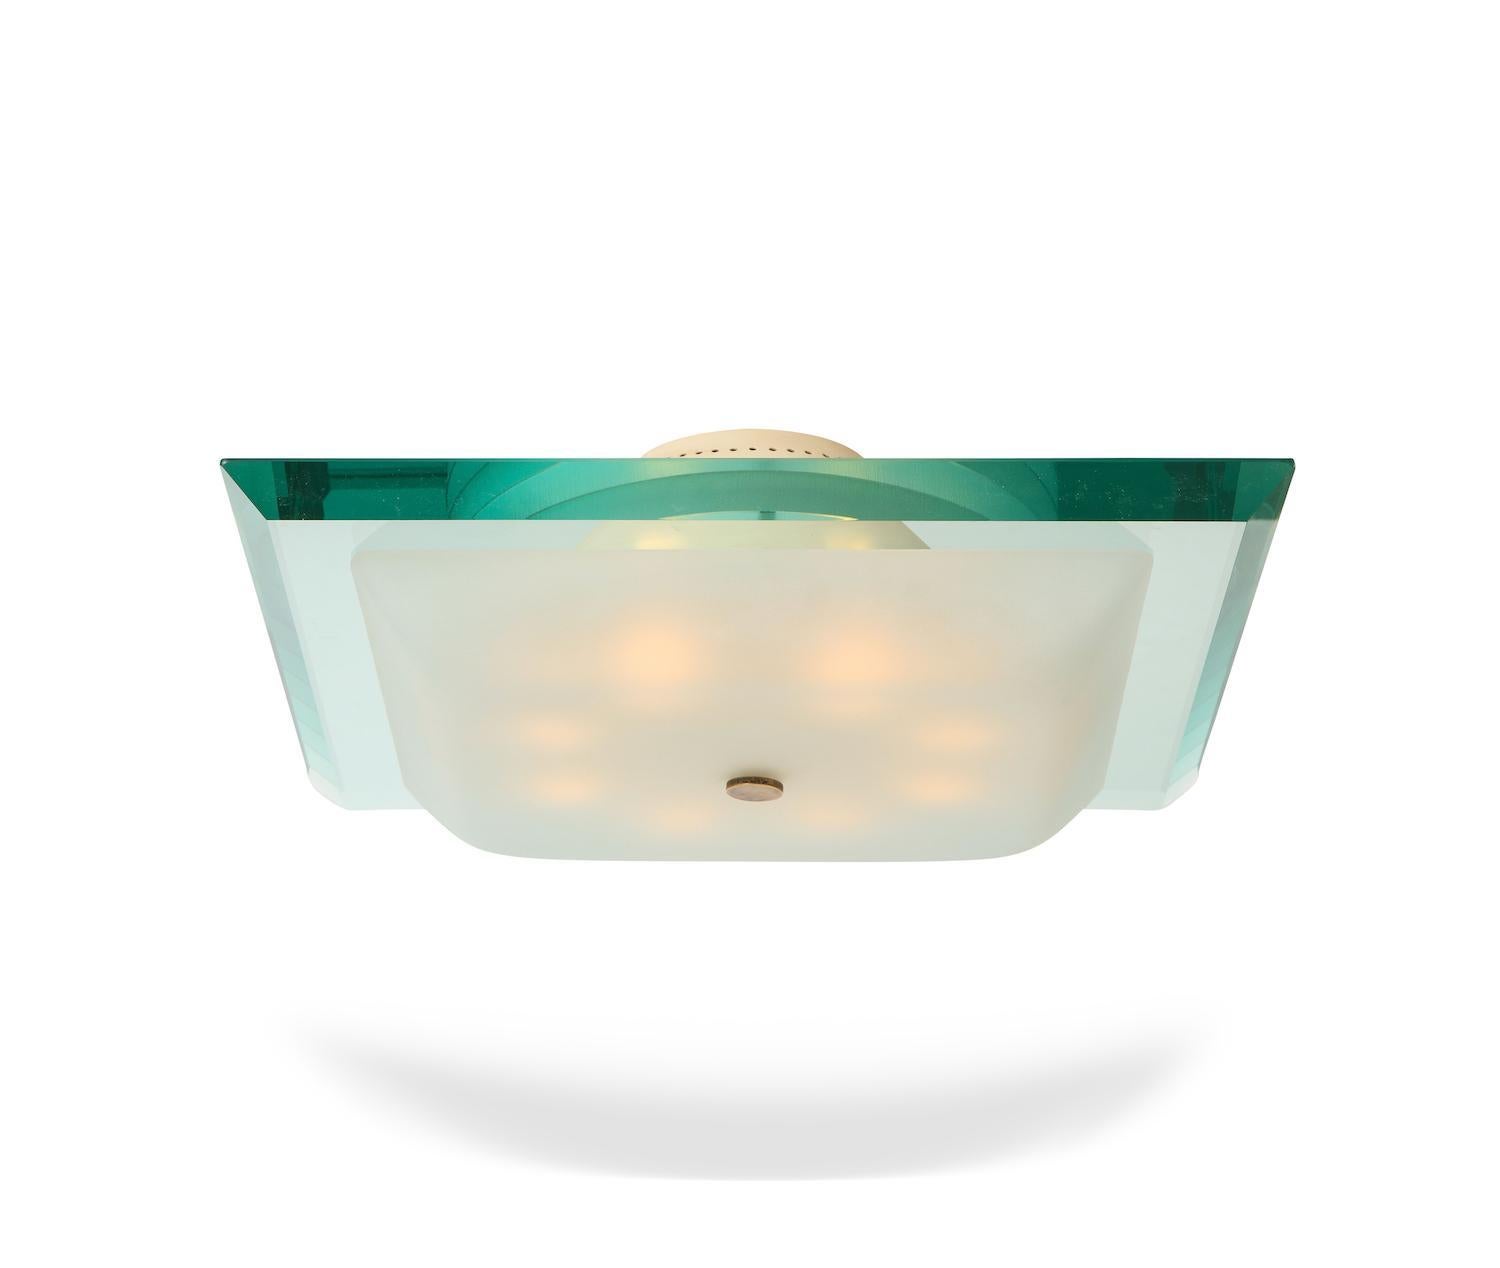 Painted metal, brass, frosted glass, glass. Elegant and compact fixture with 8 Edison sockets, thick beveled glass and frosted glass shade. Can be used as a flush mount or hang off the ceiling. Very good vintage condition. Painted metal has been